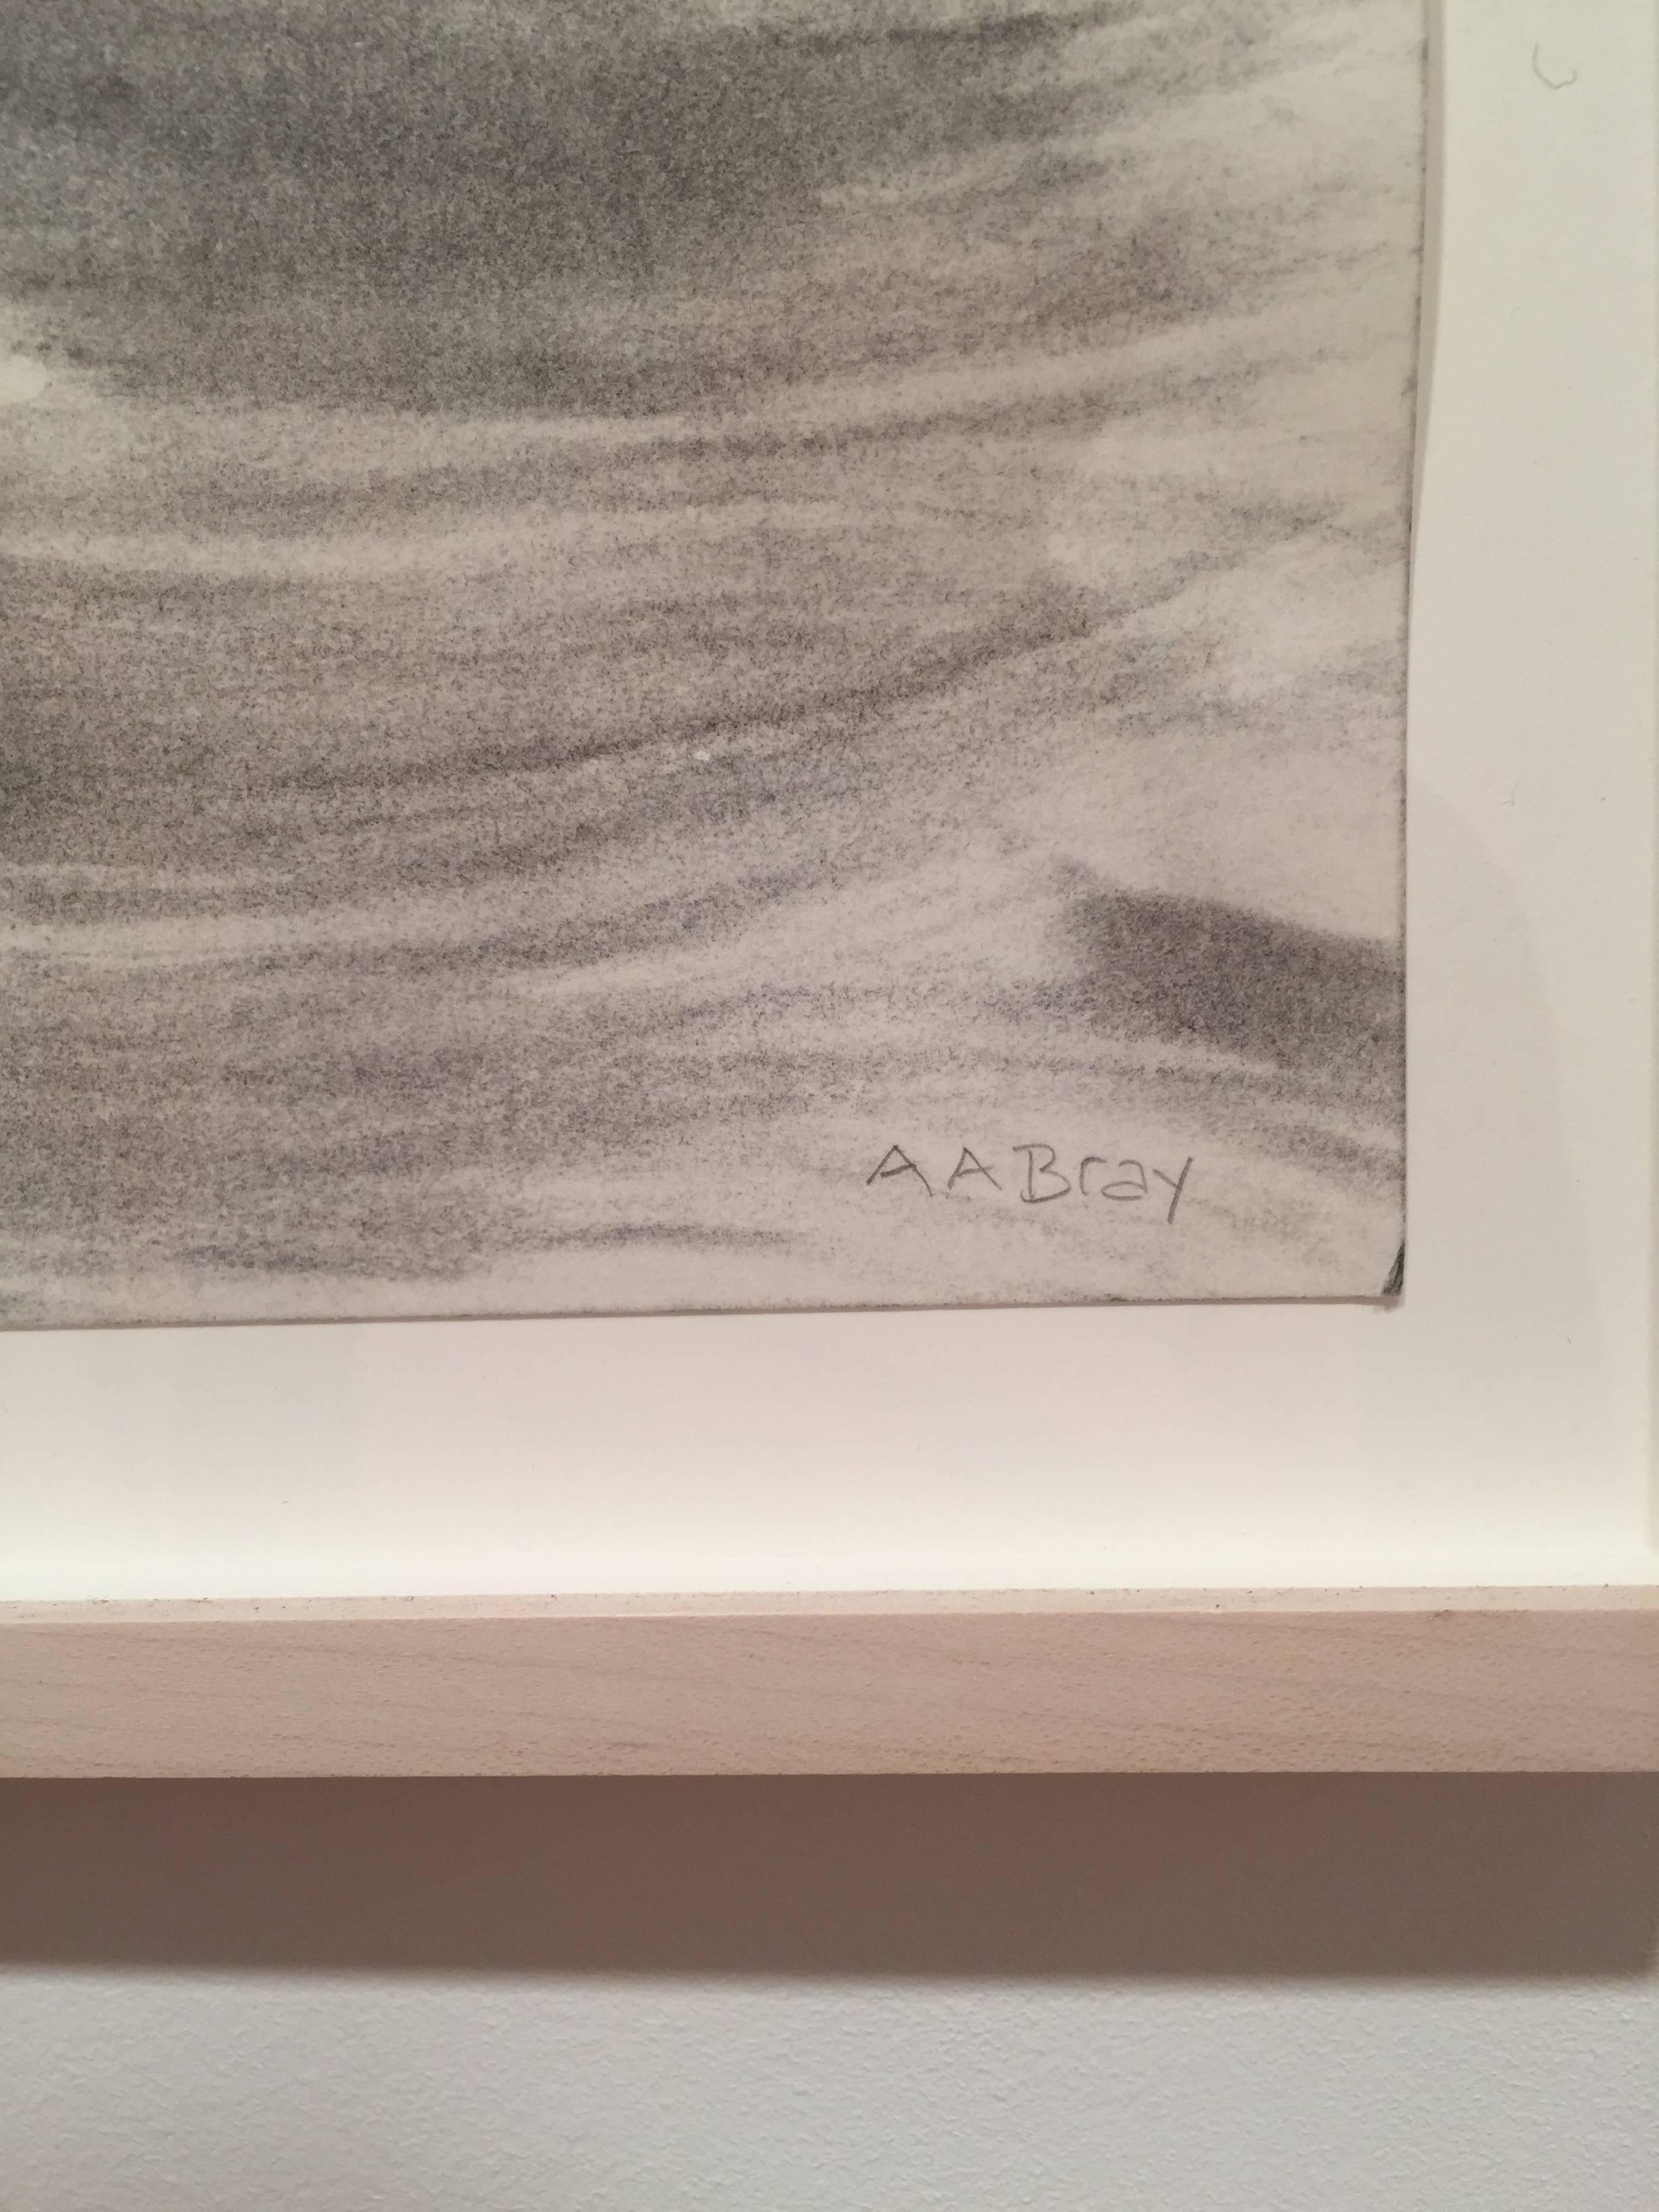 Alan Bray, Four Things in the Wind, charcoal and conte landscape drawing, 2015 5